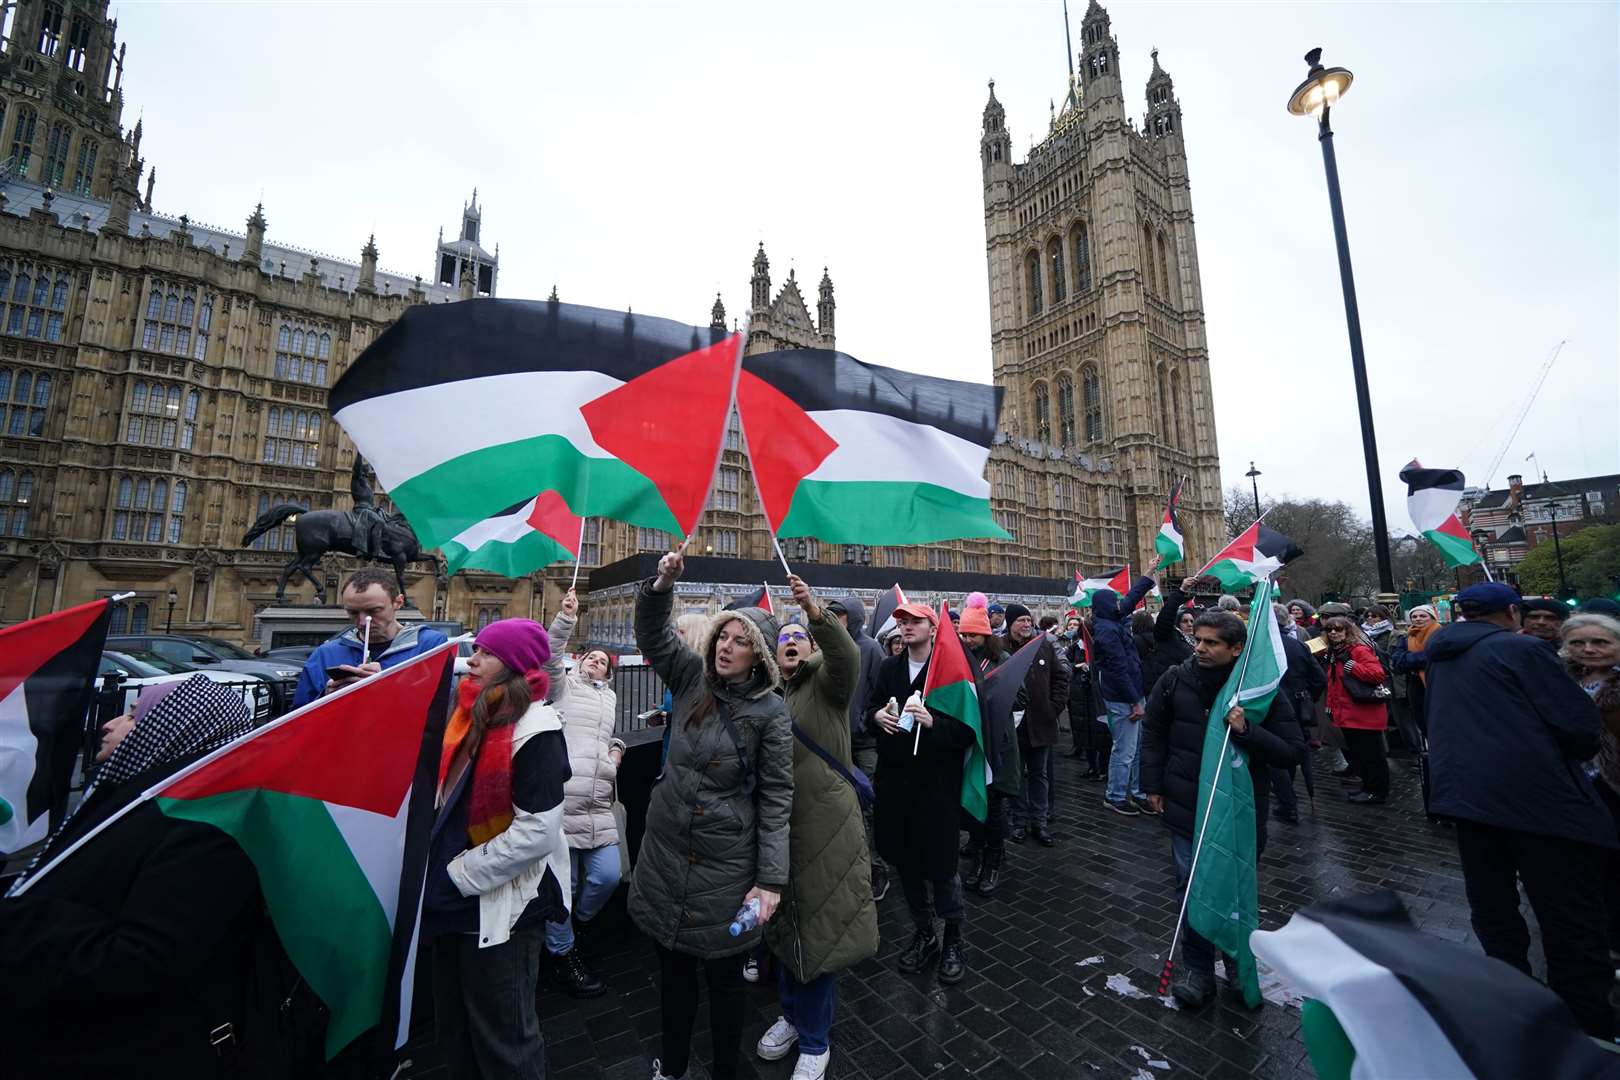 The Israel-Hamas conflict has sparked months of protests across the UK, including outside Parliament (Lucy North/PA)